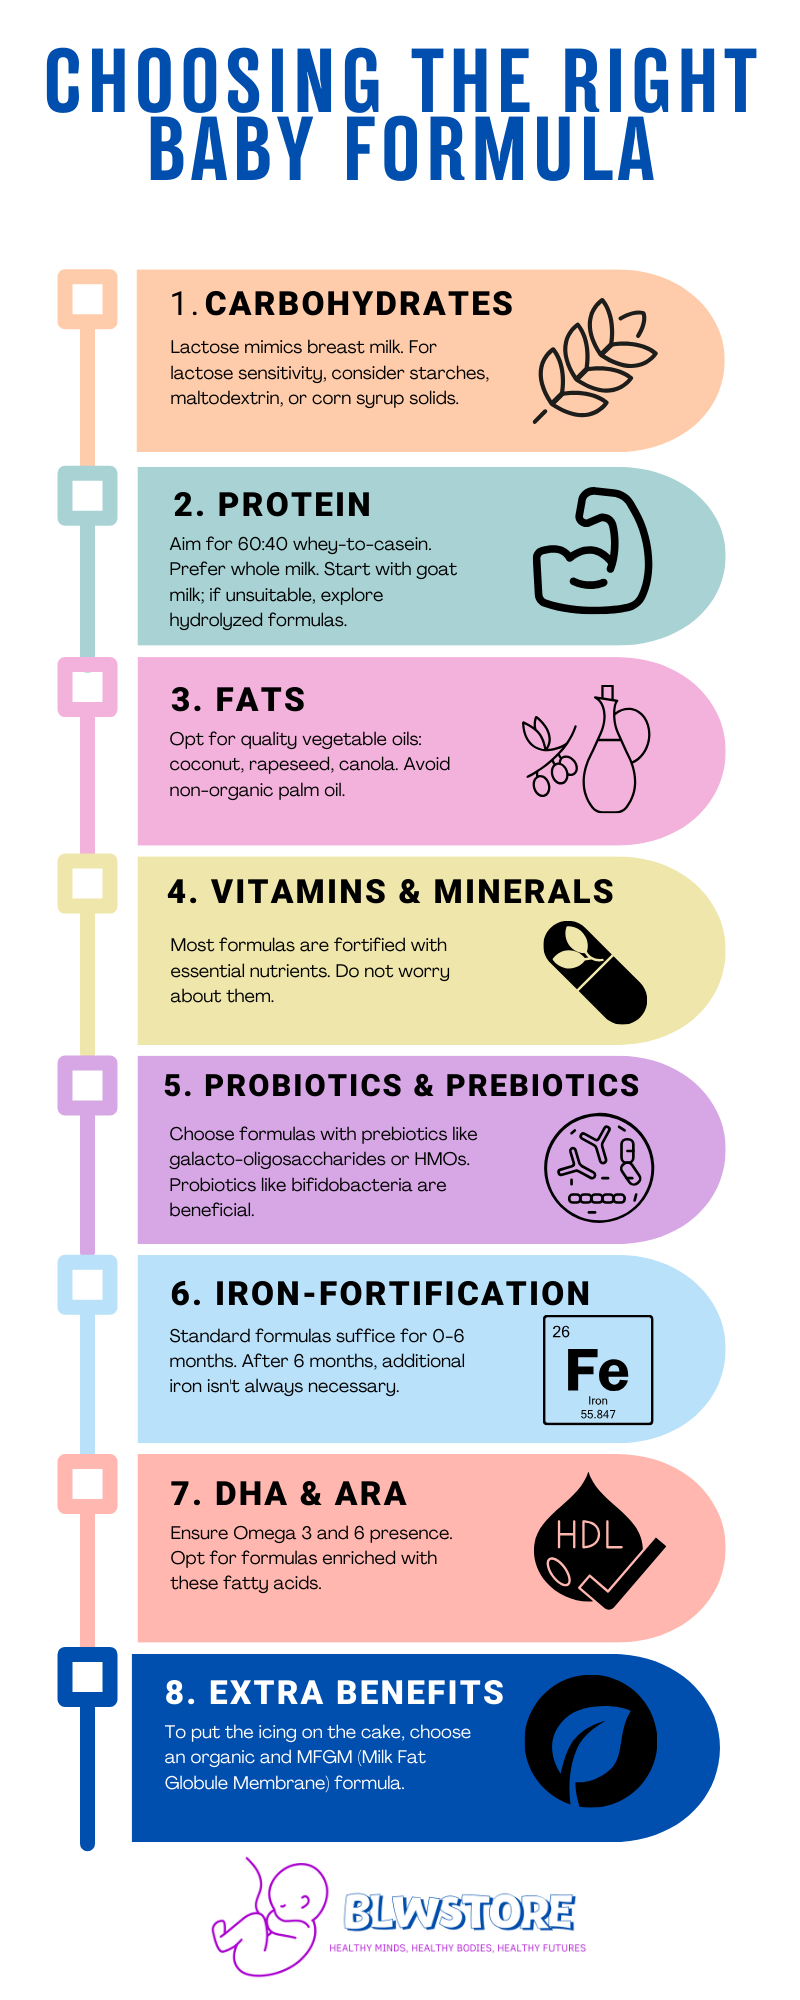 Choosing-the-right-baby-formula-infographic